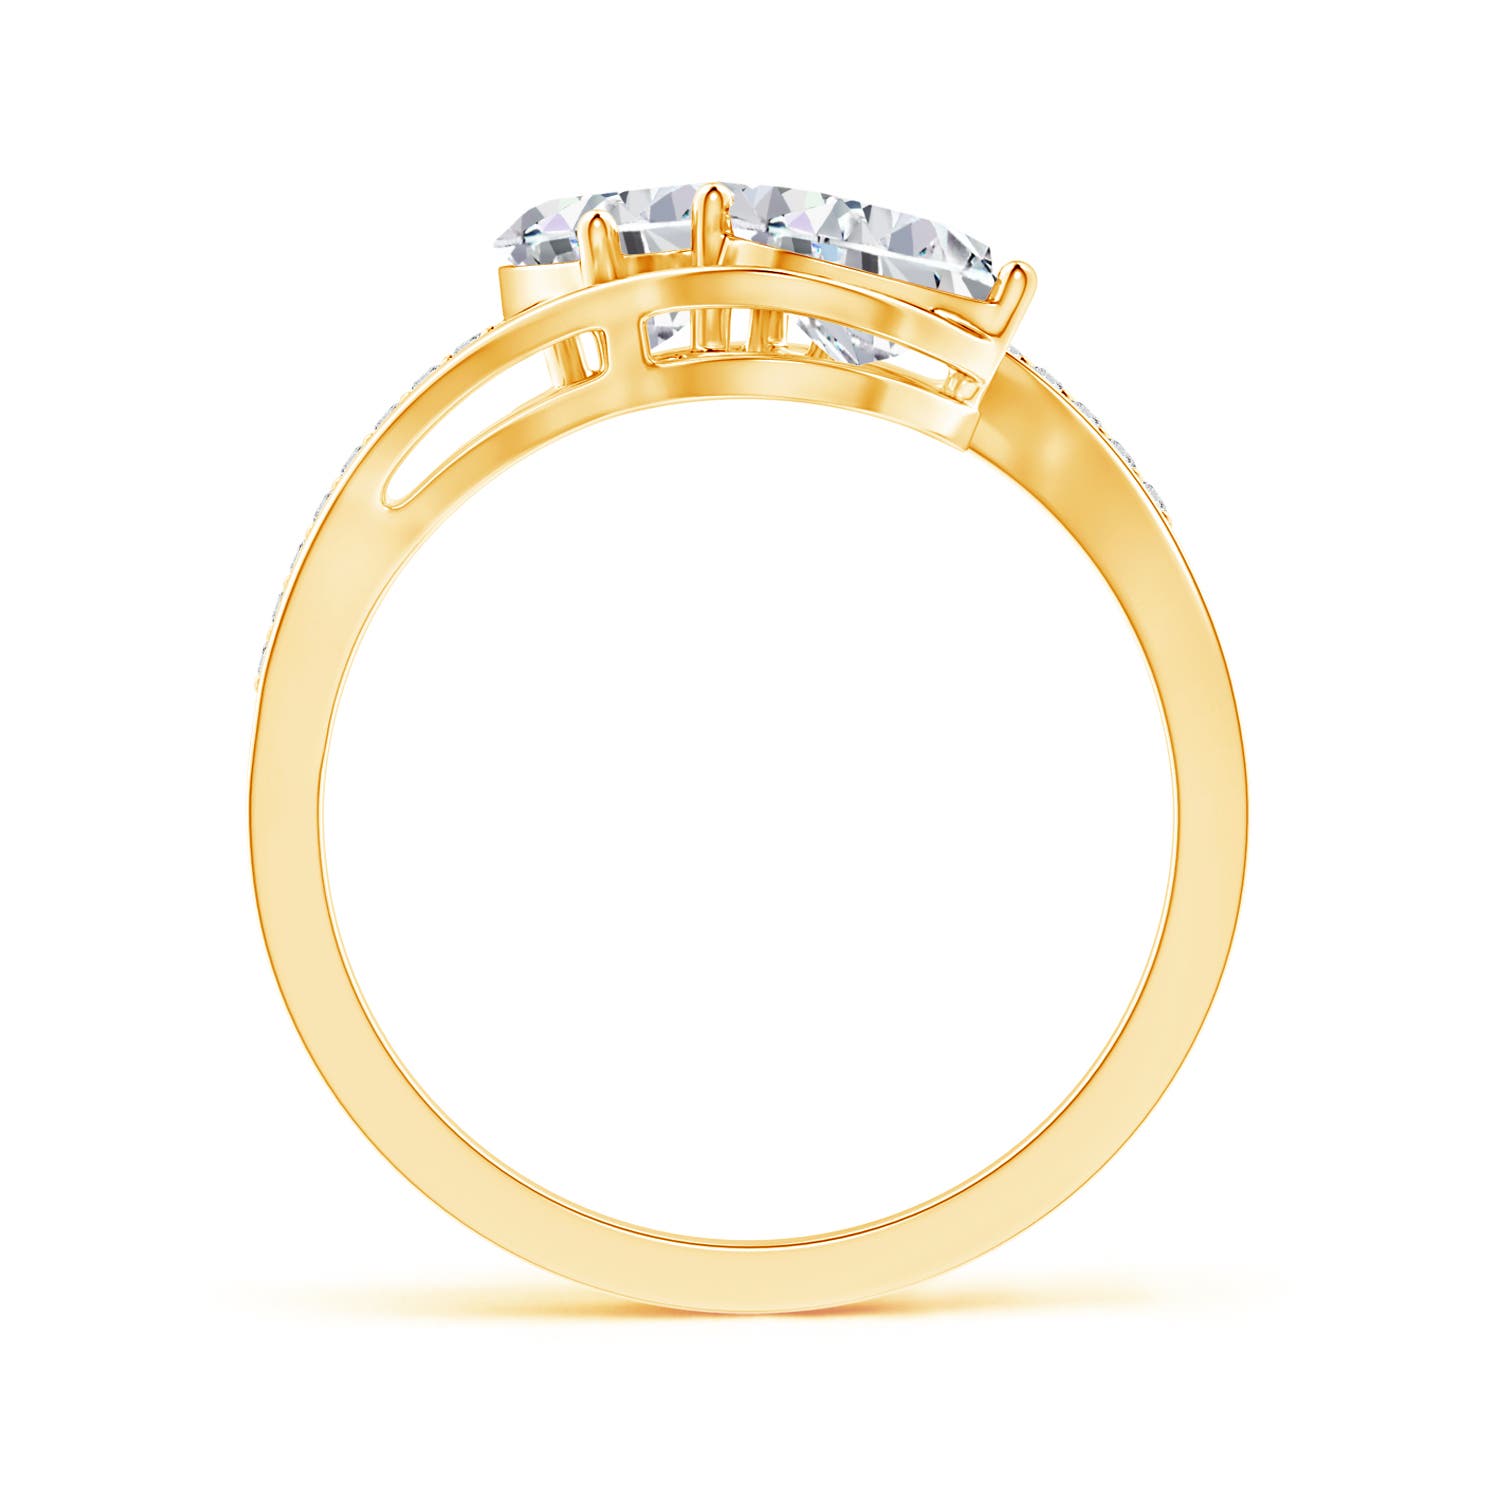 H, SI2 / 1.51 CT / 14 KT Yellow Gold